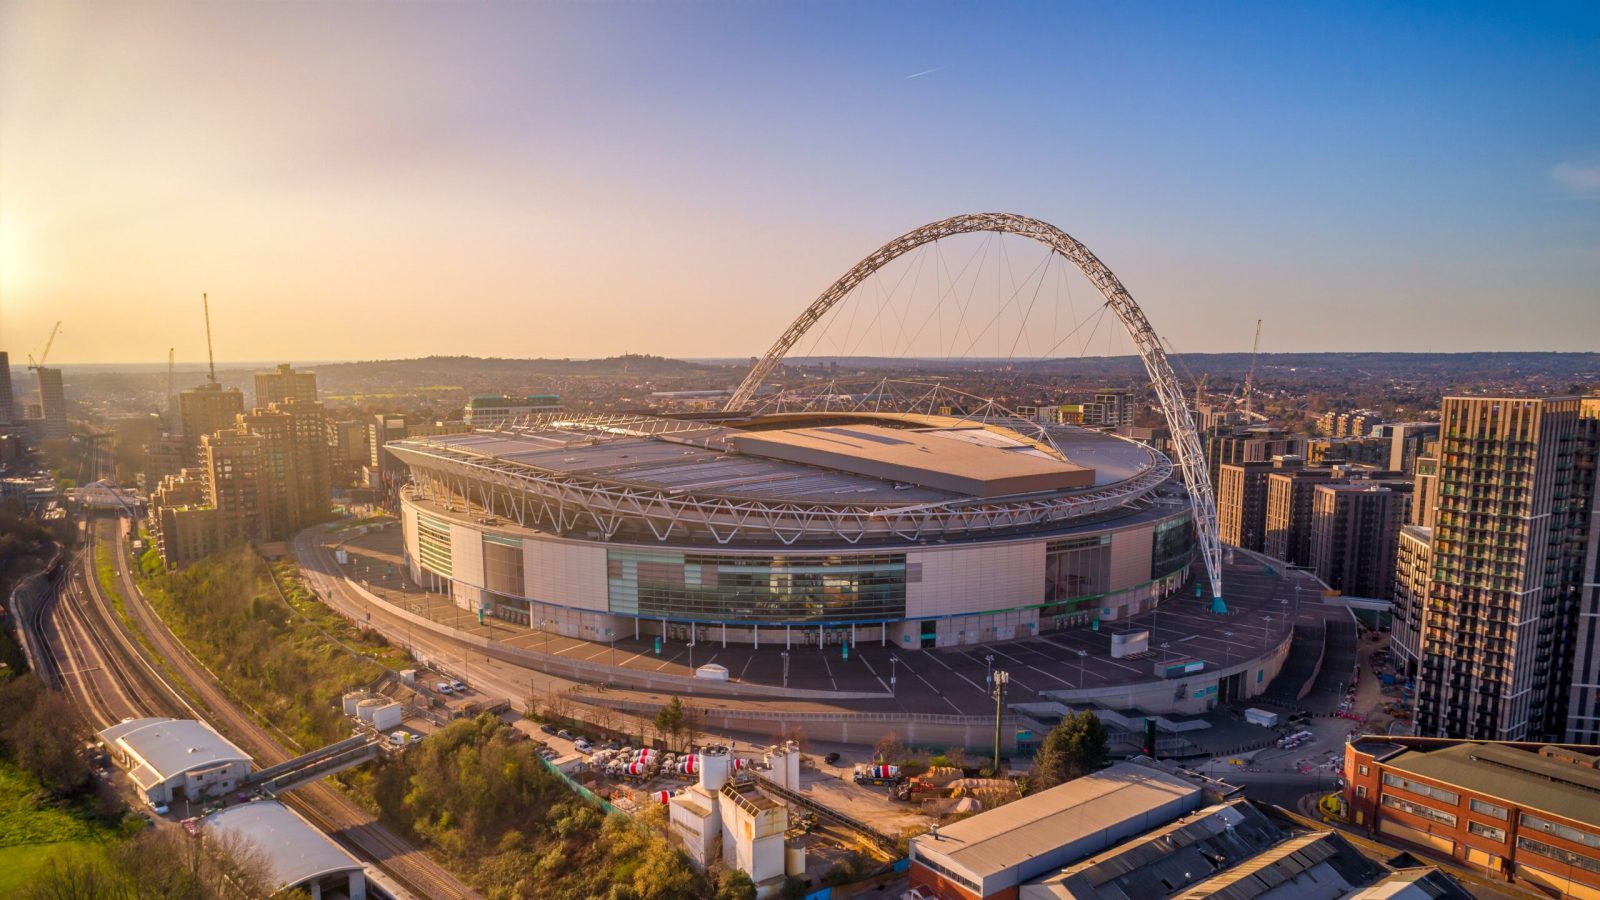 Even If You Don’t Know Much About Geography, Play This World Landmarks Quiz Anyway Wembley Stadium, England